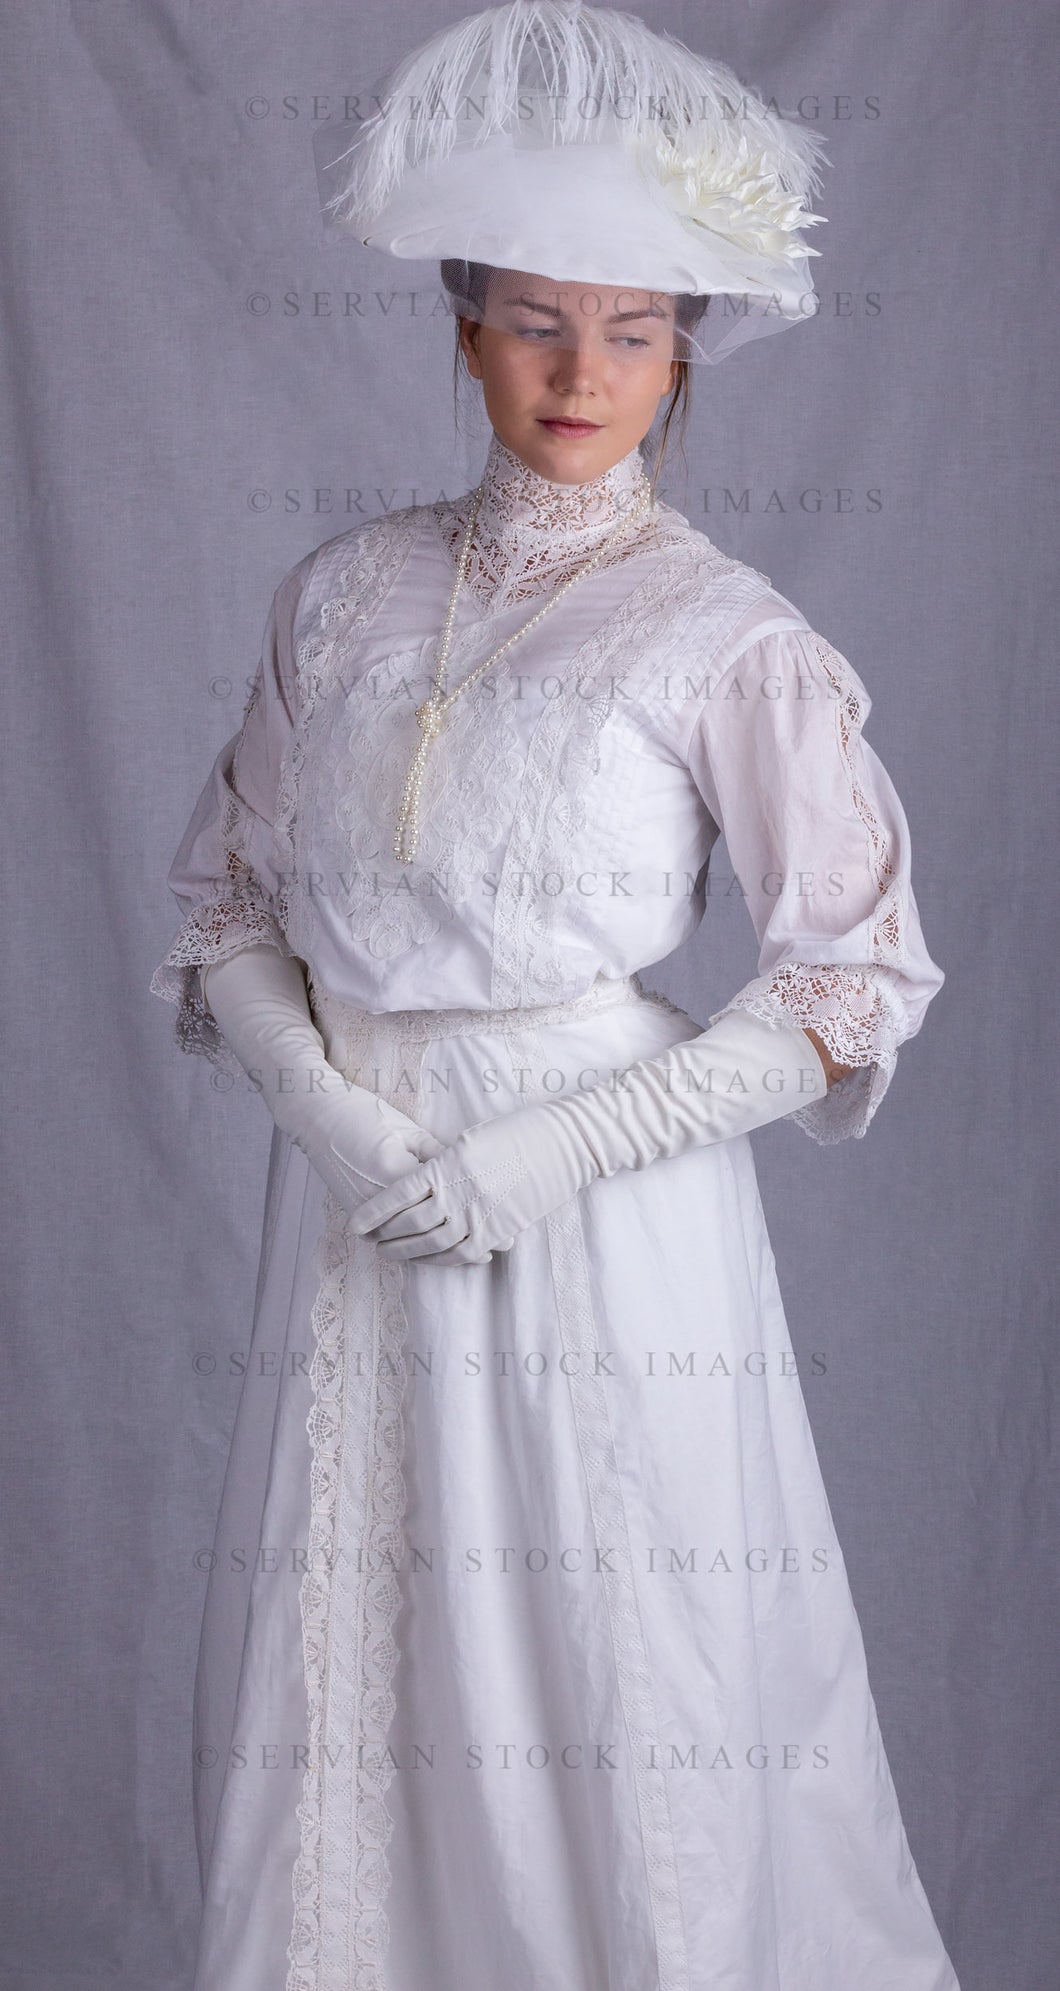 Edwardian woman in a white lace blouse and skirt with a pearl necklace (Tayla 0088)